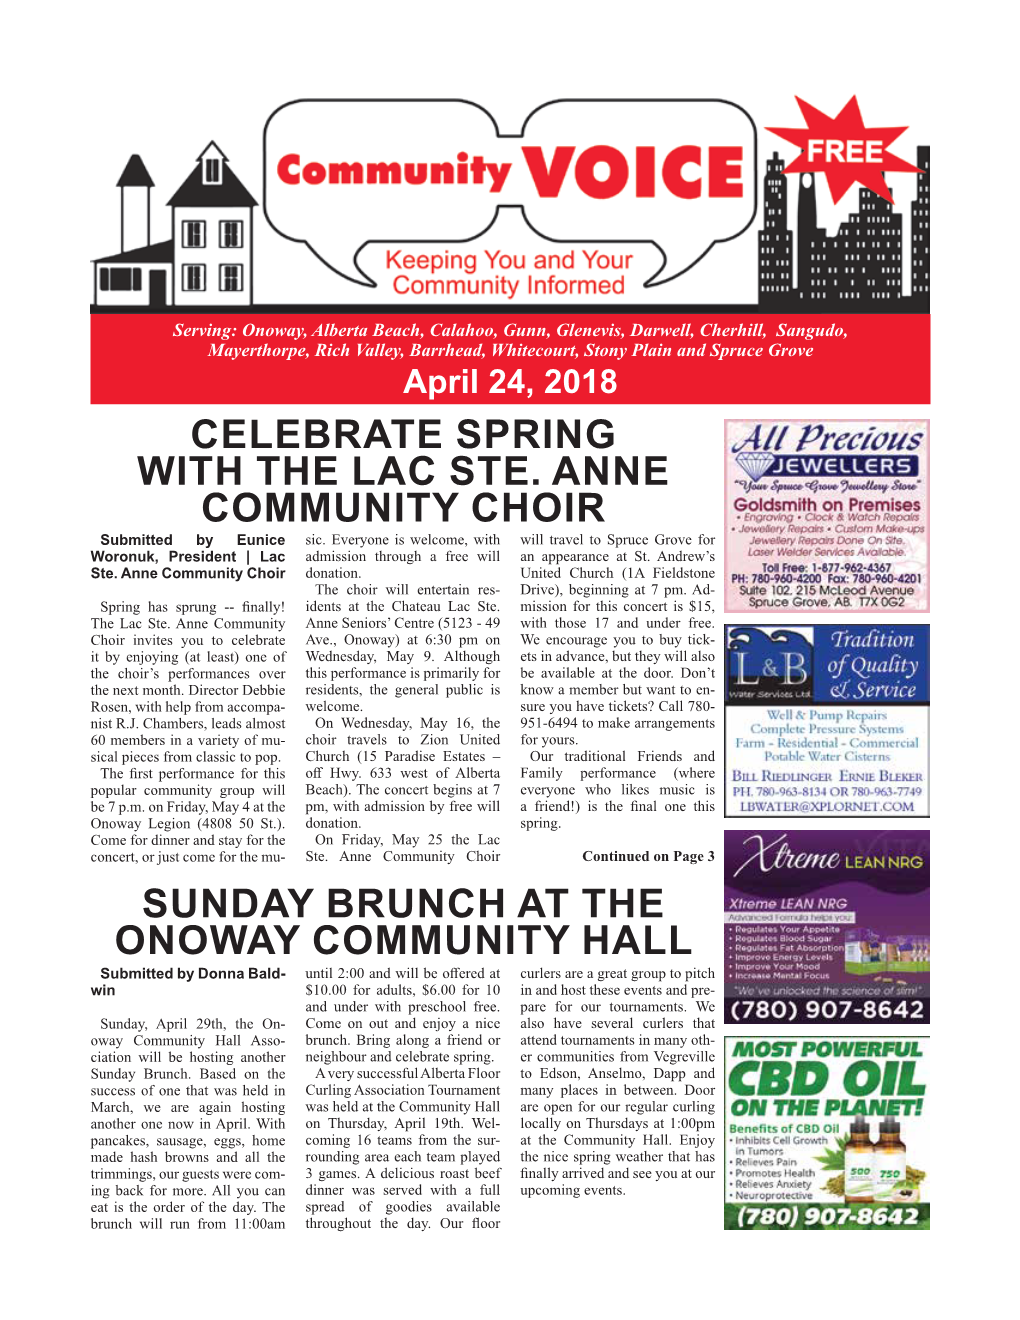 Sunday Brunch at the Onoway Community Hall Celebrate Spring